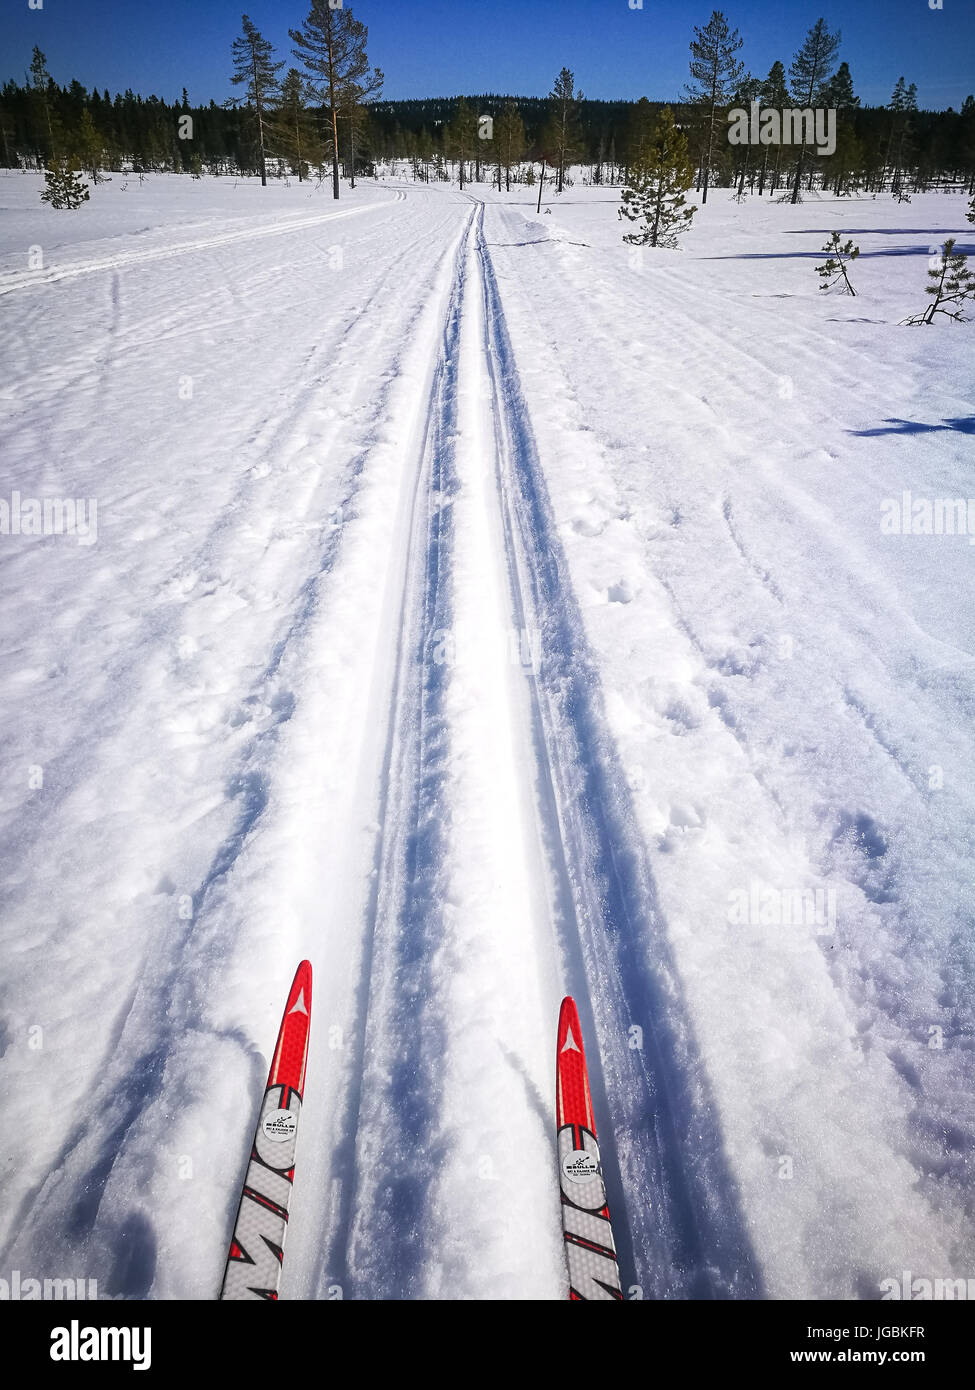 Tip of two cross country skis in groomed tracks, view from athlete's position Stock Photo